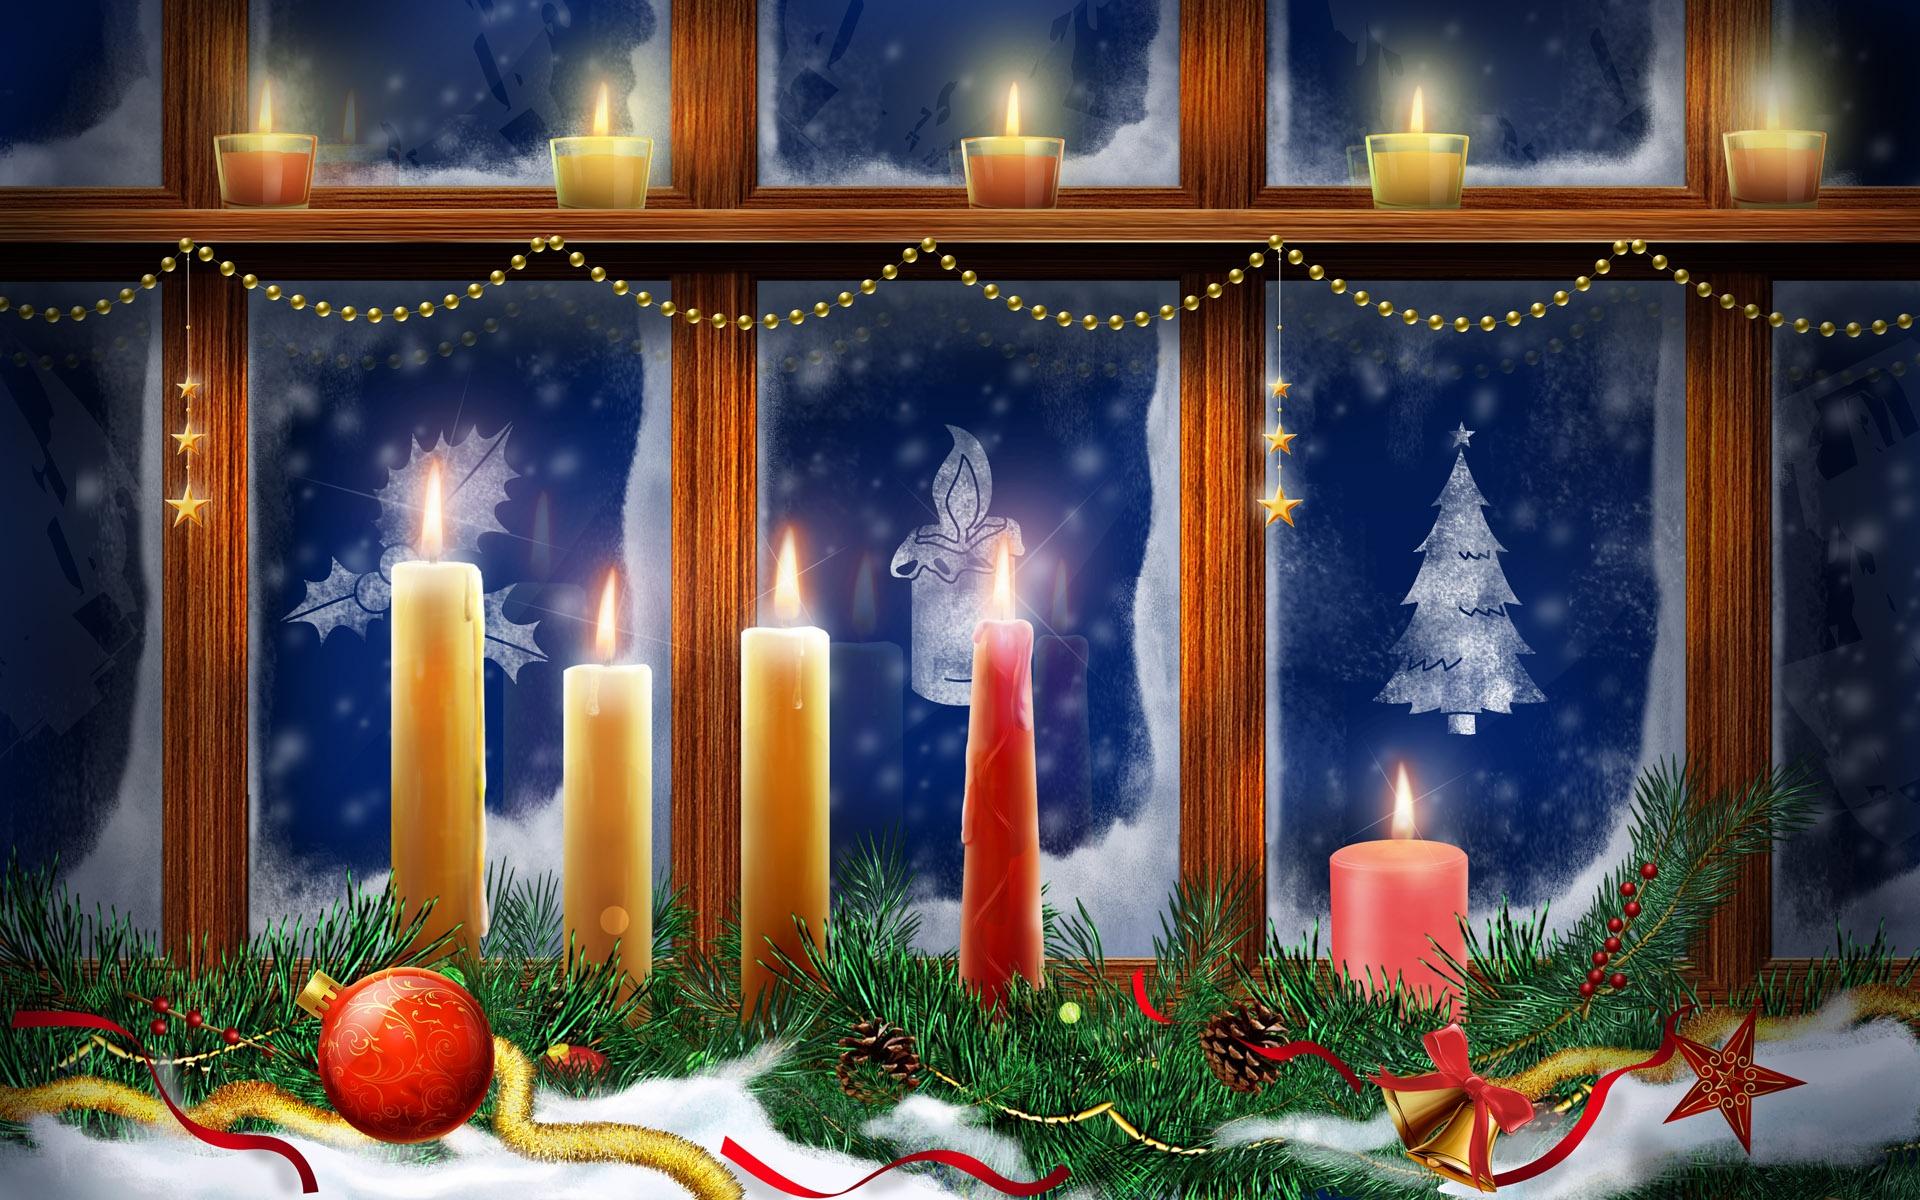 Christmas Lighting Candles Wallpaper in jpg format for free download